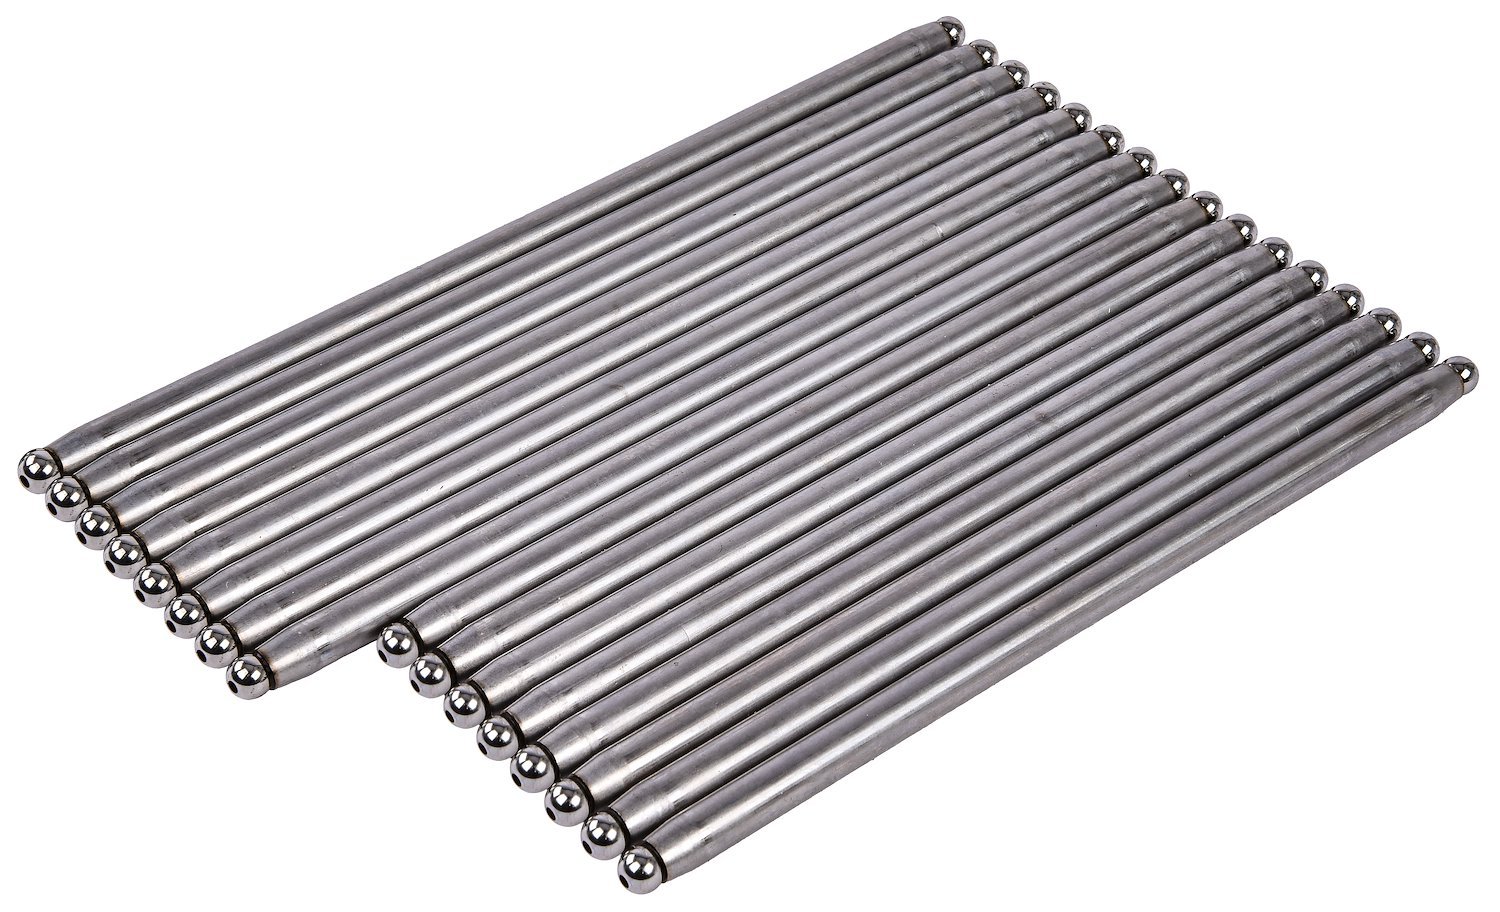 8.281 in. Intake/9.254 in. Exhaust Pushrods for Big Block Chevy with Standard Deck Height